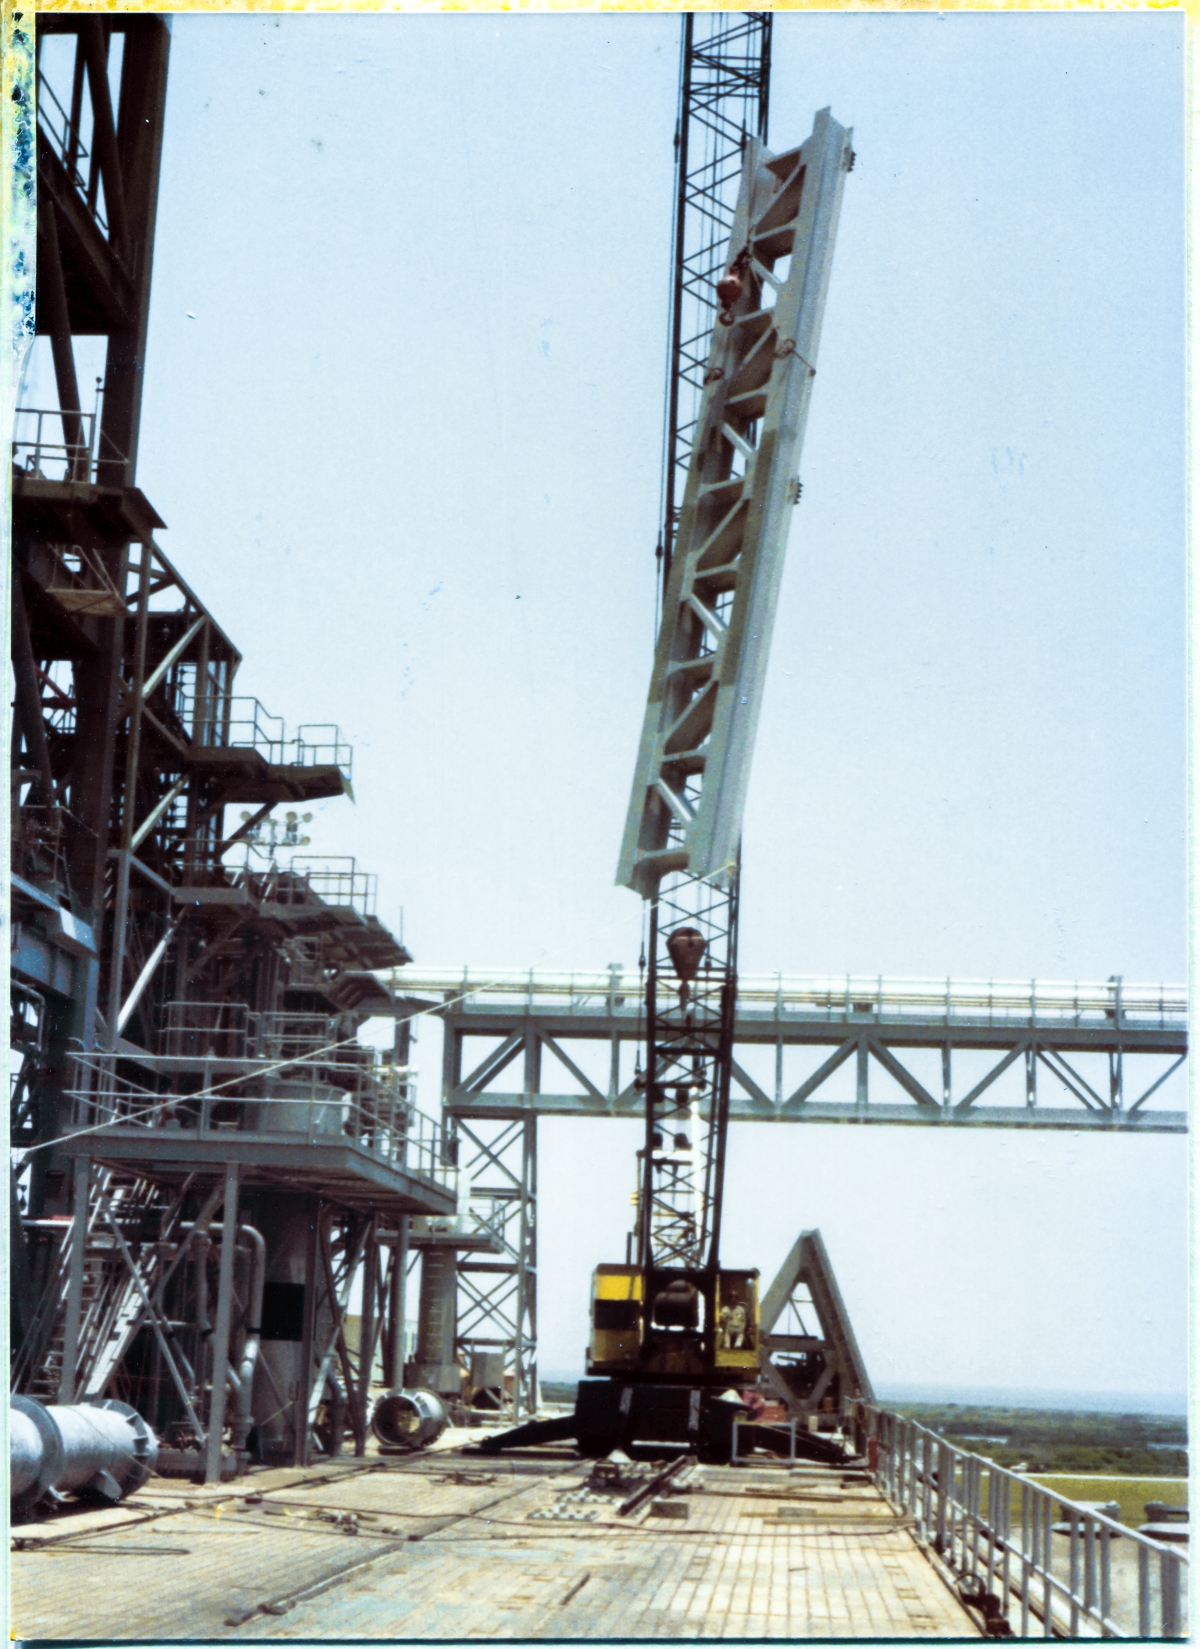 Image 078. The GOX Arm Strongback now begins its vertical journey to the top of the Fixed Service Structure (a small part of which is visible along the left margin of the photograph, extending up to and beyond the top) at Space Shuttle Launch Complex 39-B, Kennedy Space Center, Florida. Beneath it, on the ground, all personnel have been cleared from the area, and will remain so as a safety precaution until the Strongback is firmly welded to the FSS Primary Framing, far above where it is located at this moment. A Union Ironworker from Local 808, working for Ivey Steel, remains unseen, handling the tag line which is visible, attached to the lower right-side corner of the Strongback, keeping it properly oriented as it rises higher and higher into the sky. Photo by James MacLaren.